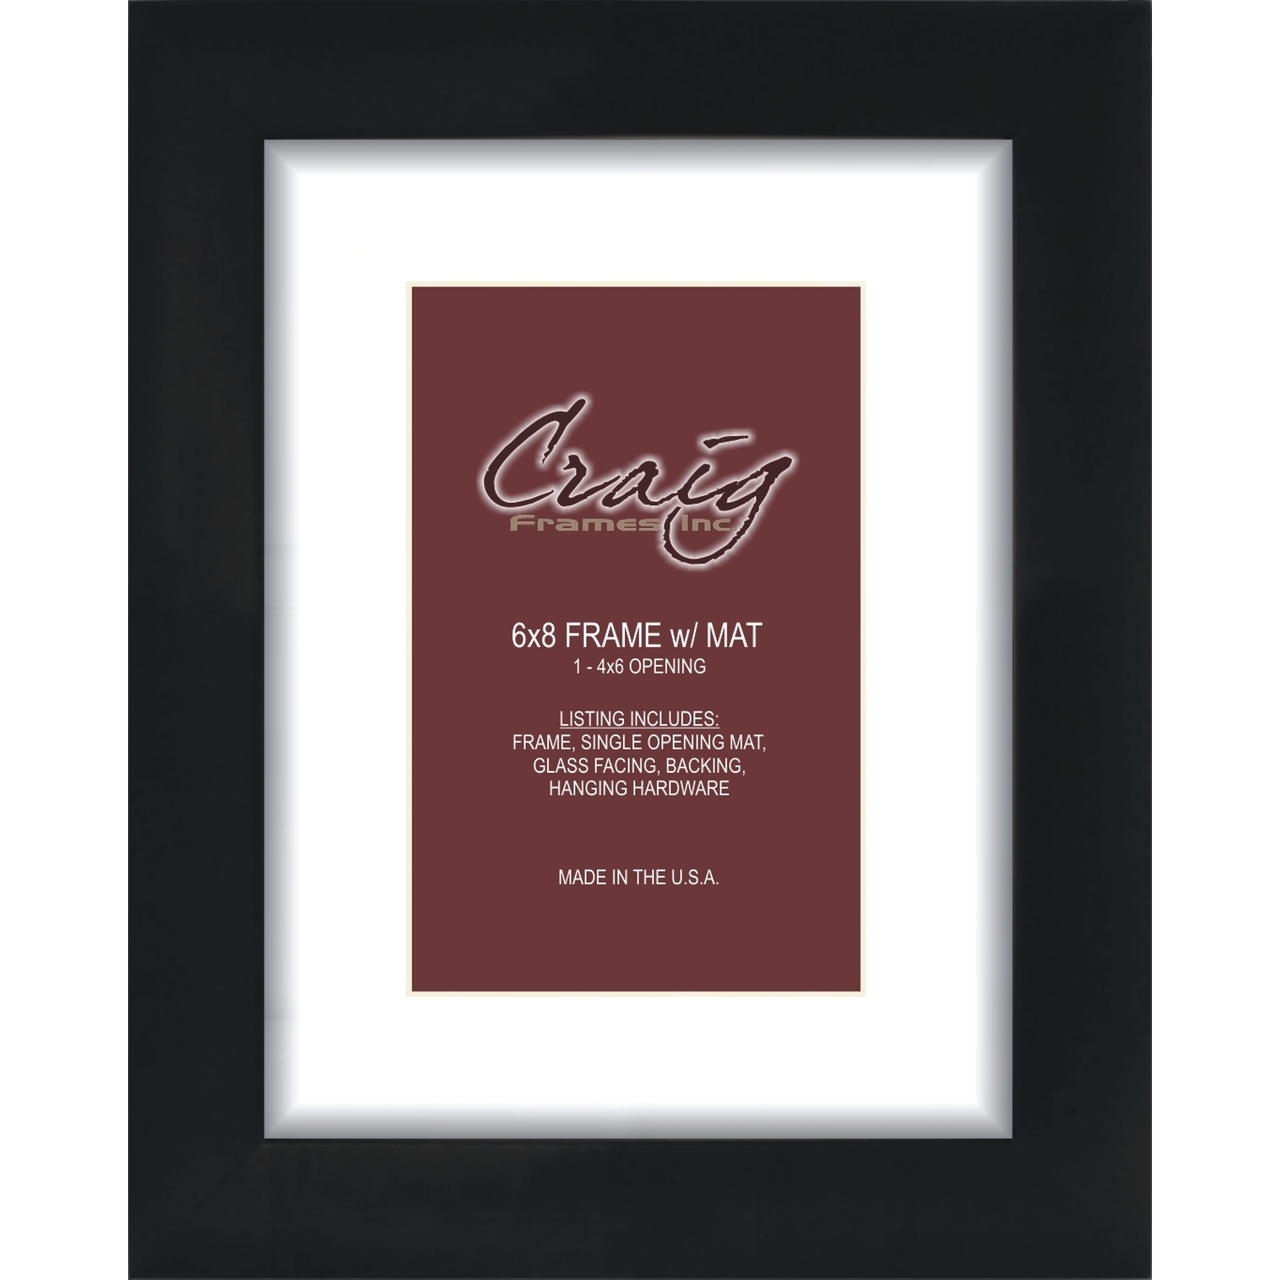 Matted Picture Frame With 4x6 Opening and 2 Border - Craig Frames